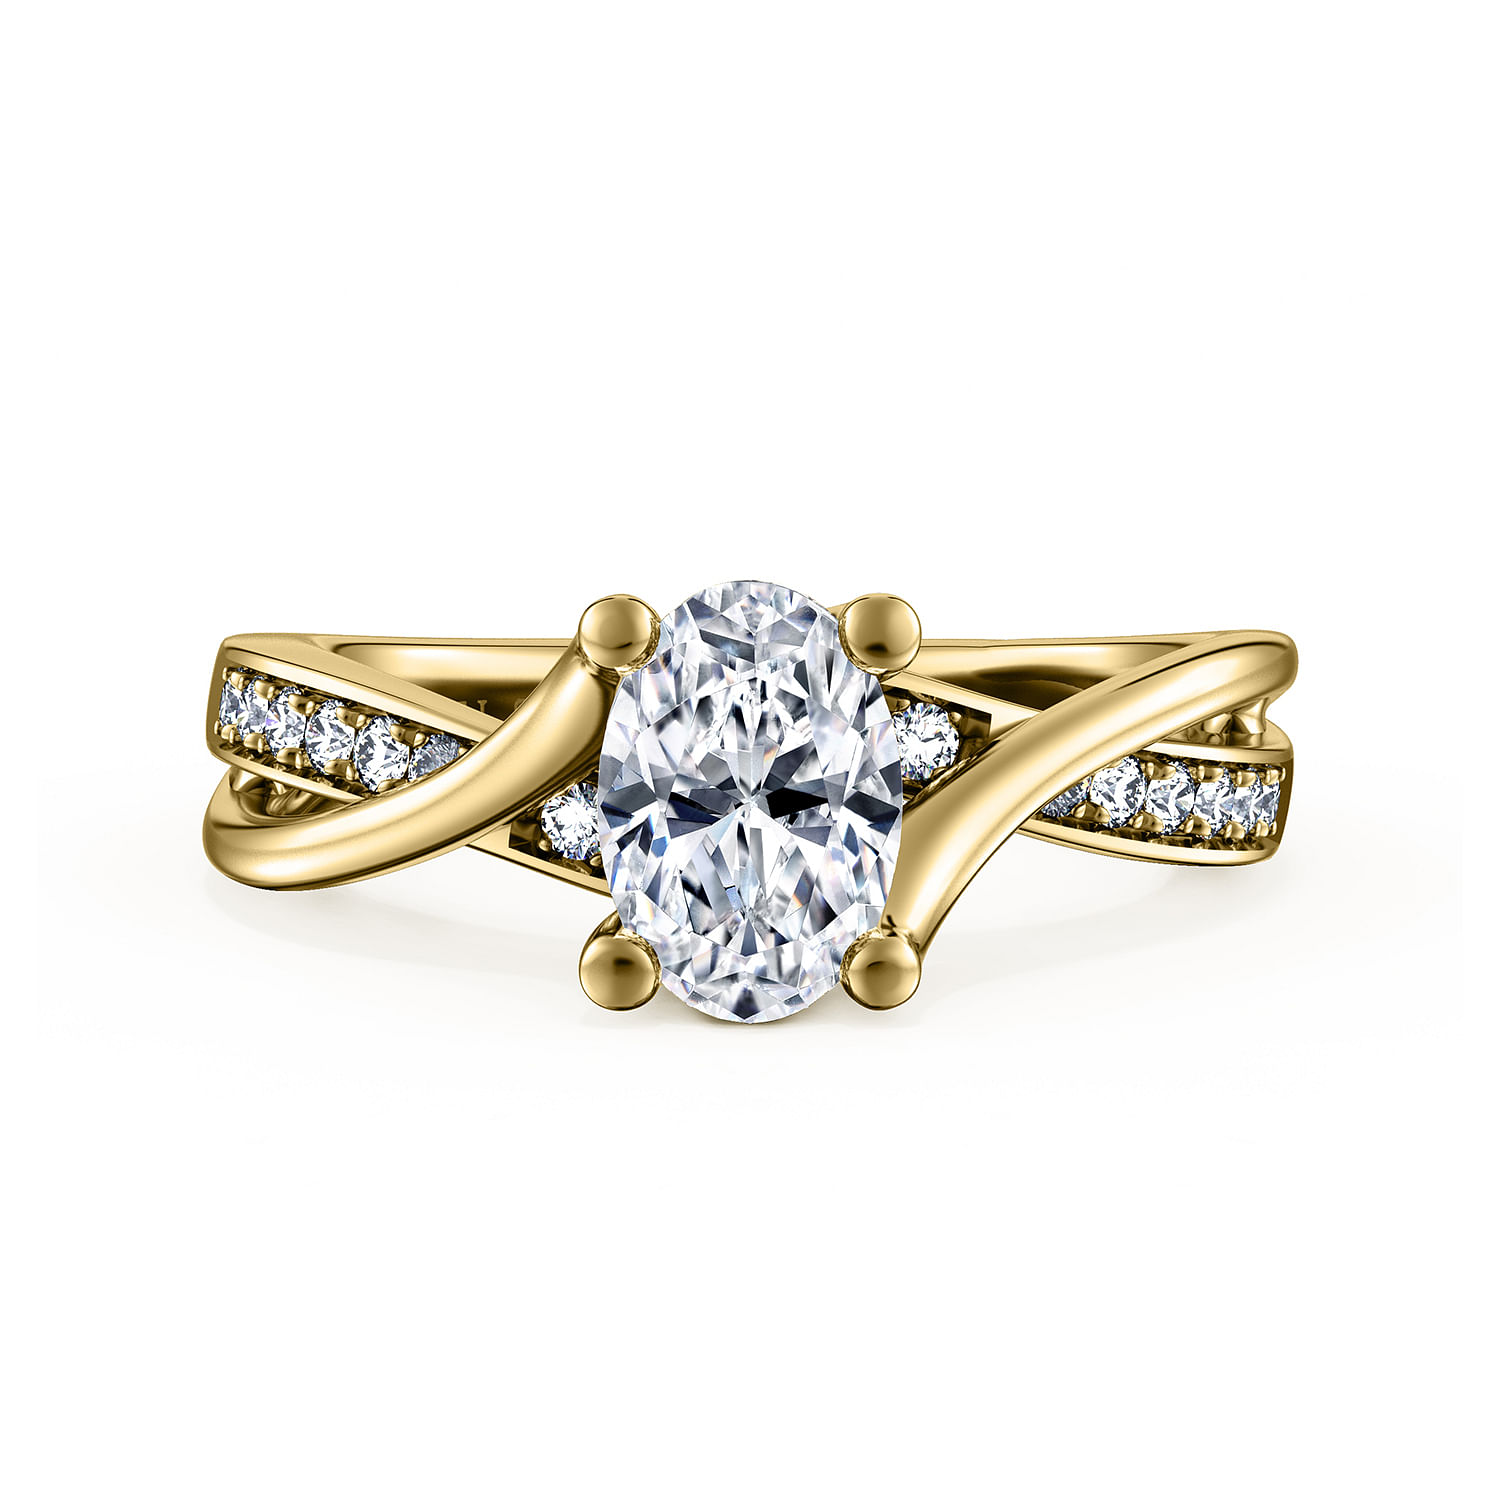 Aleesa - 14K Yellow Gold Twisted Oval Diamond Engagement Ring